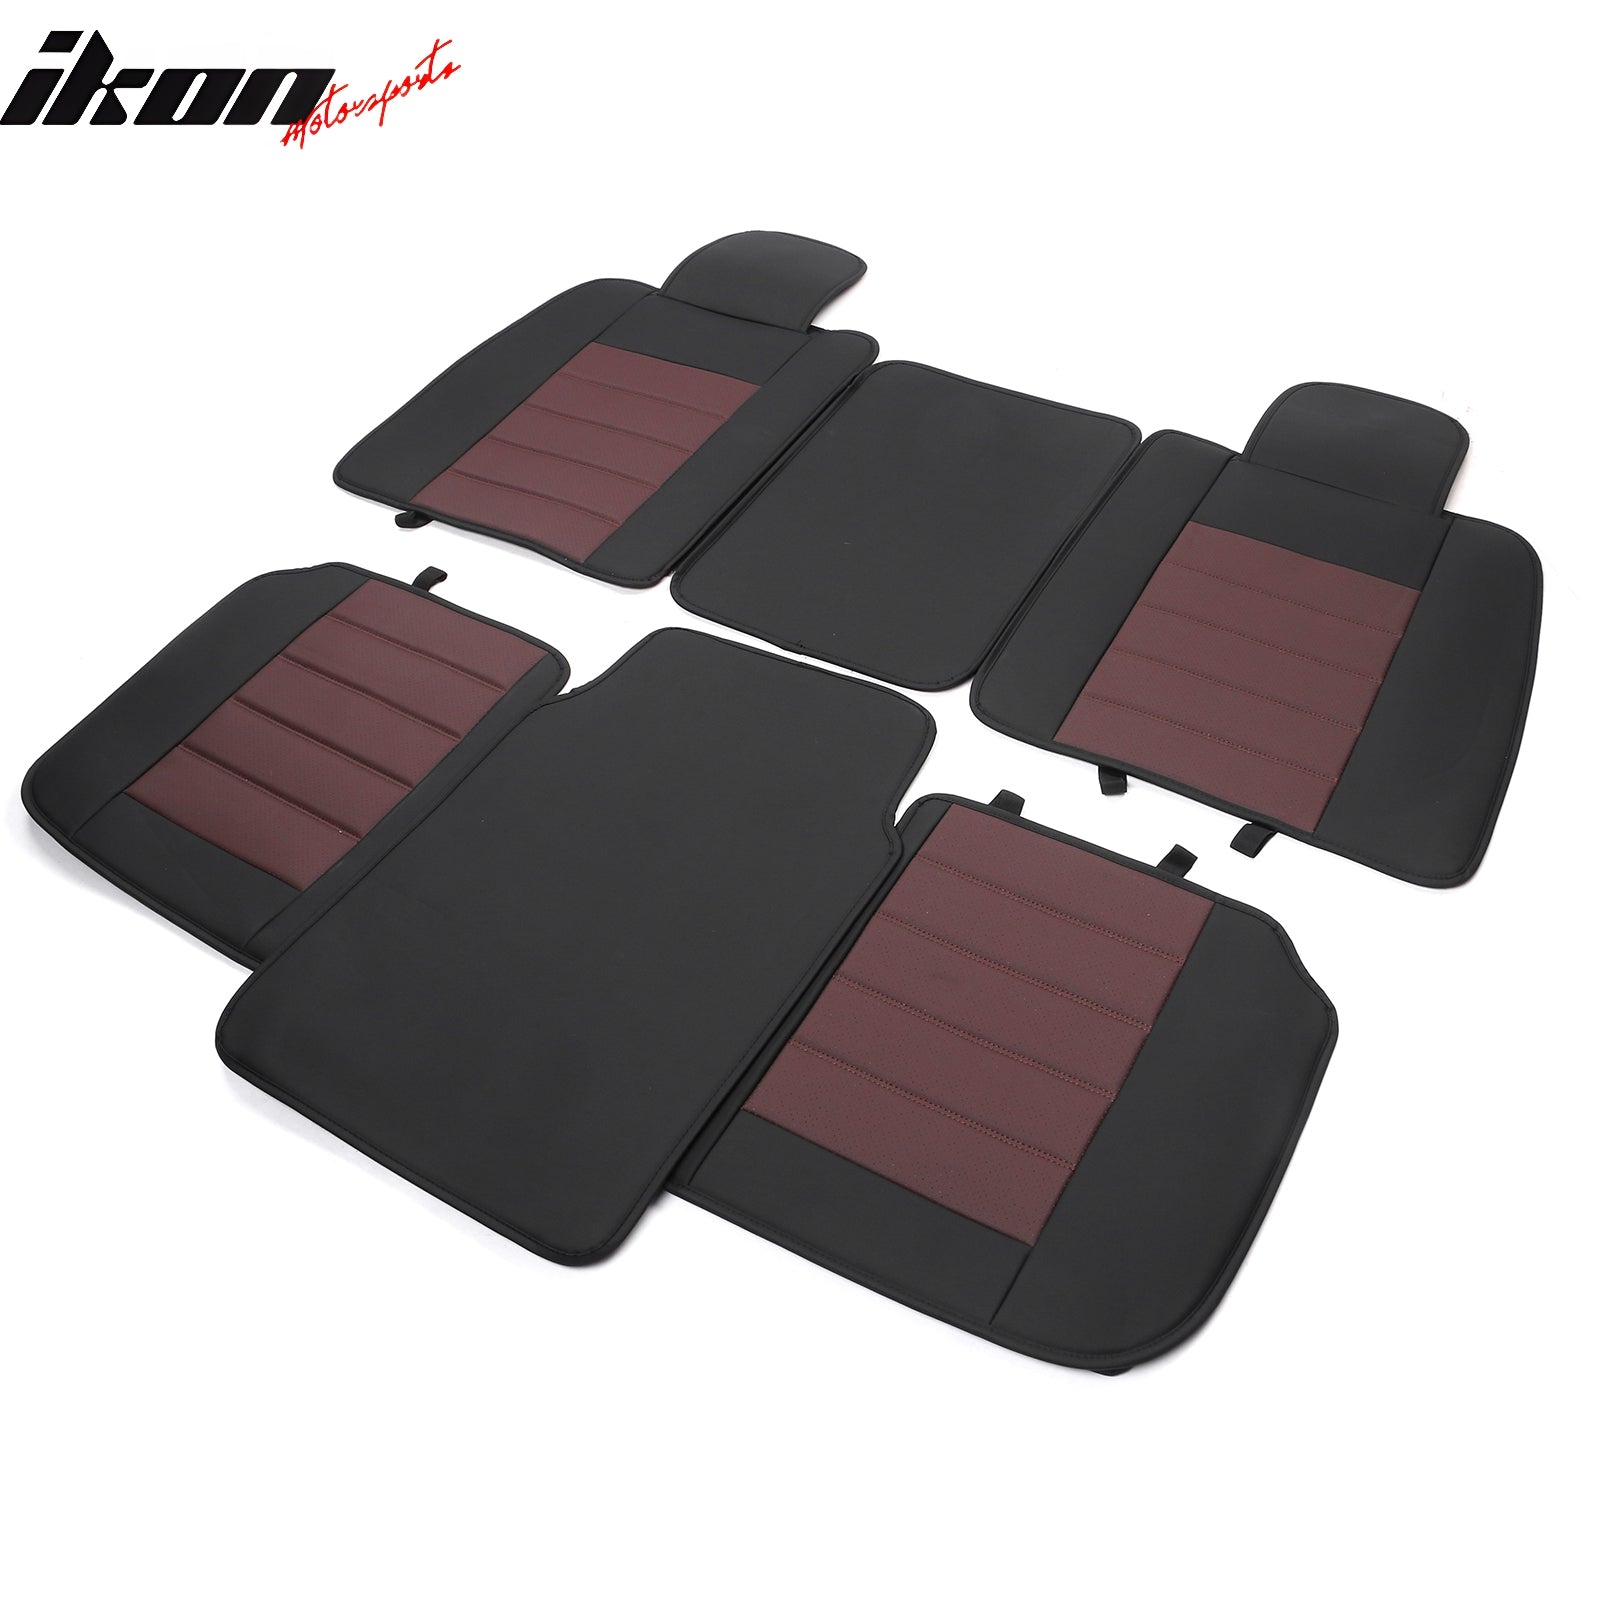 For 09-23 Ford F150 Crew Cab Pickup Seat Covers PU Leather 5 Seats - Black&Brown